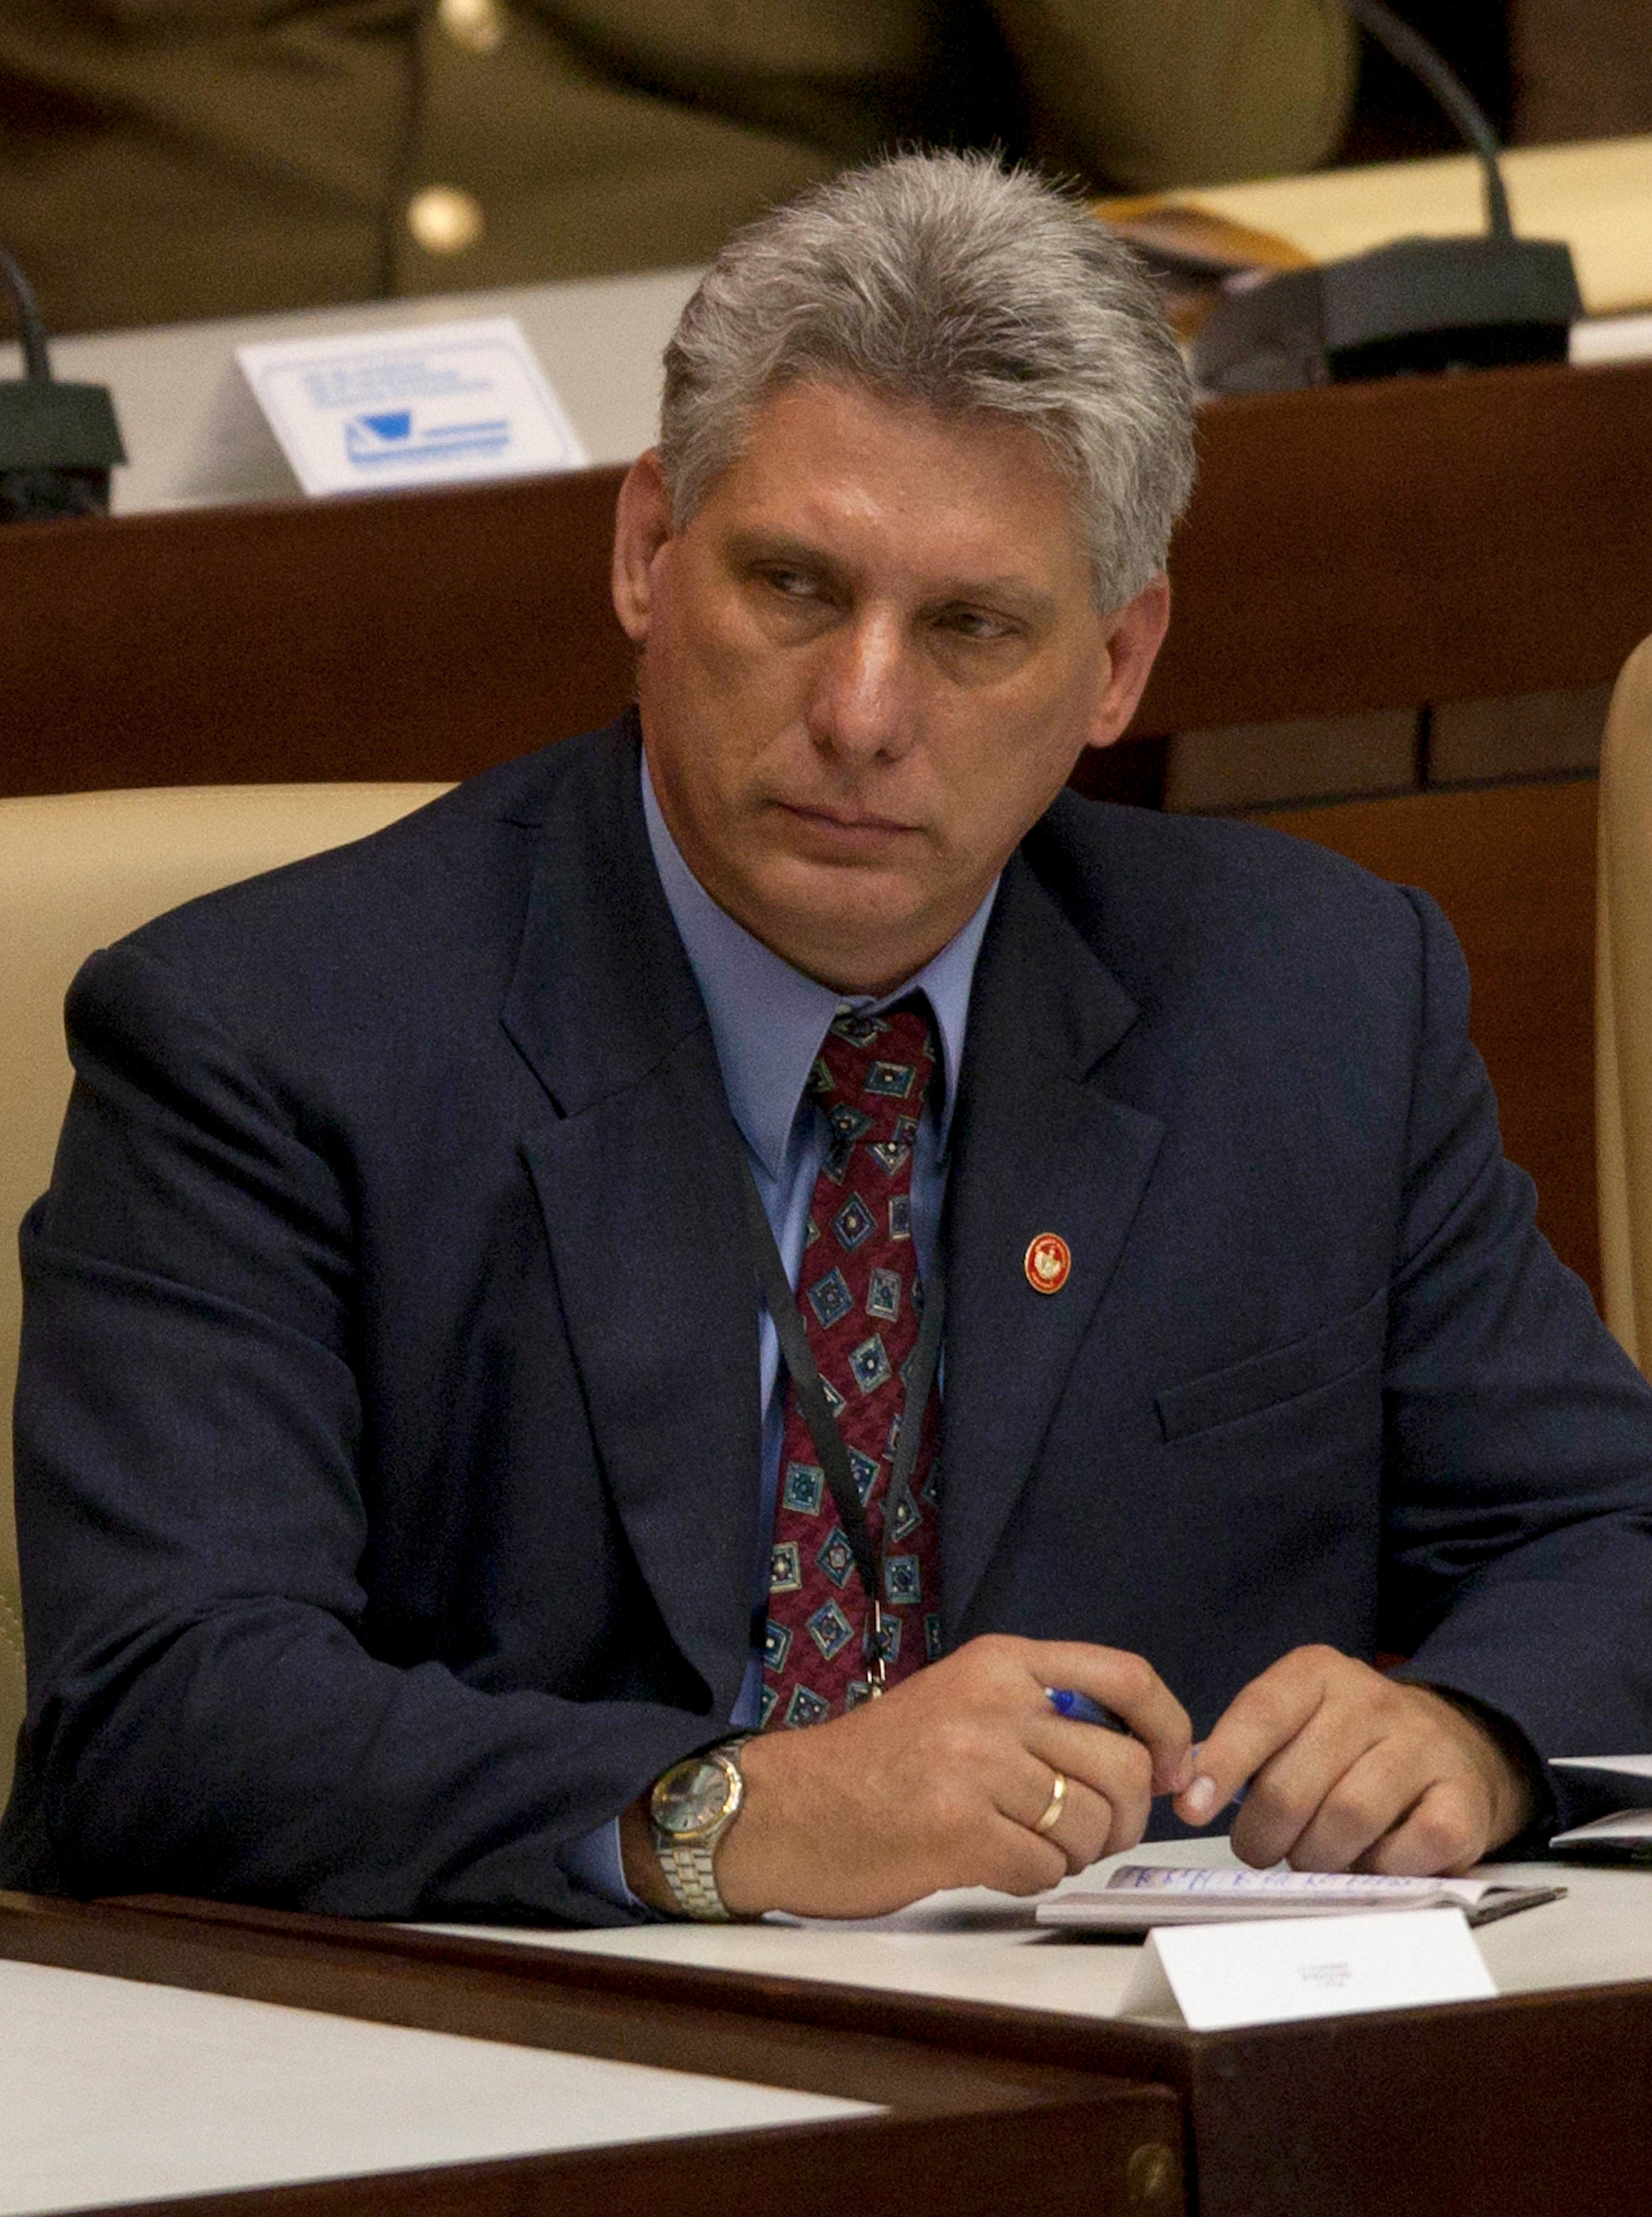 Miguel Diaz-Canel, Raul Castro's likely heir-apparent, seen as a serious-minded party ...3010 x 4040